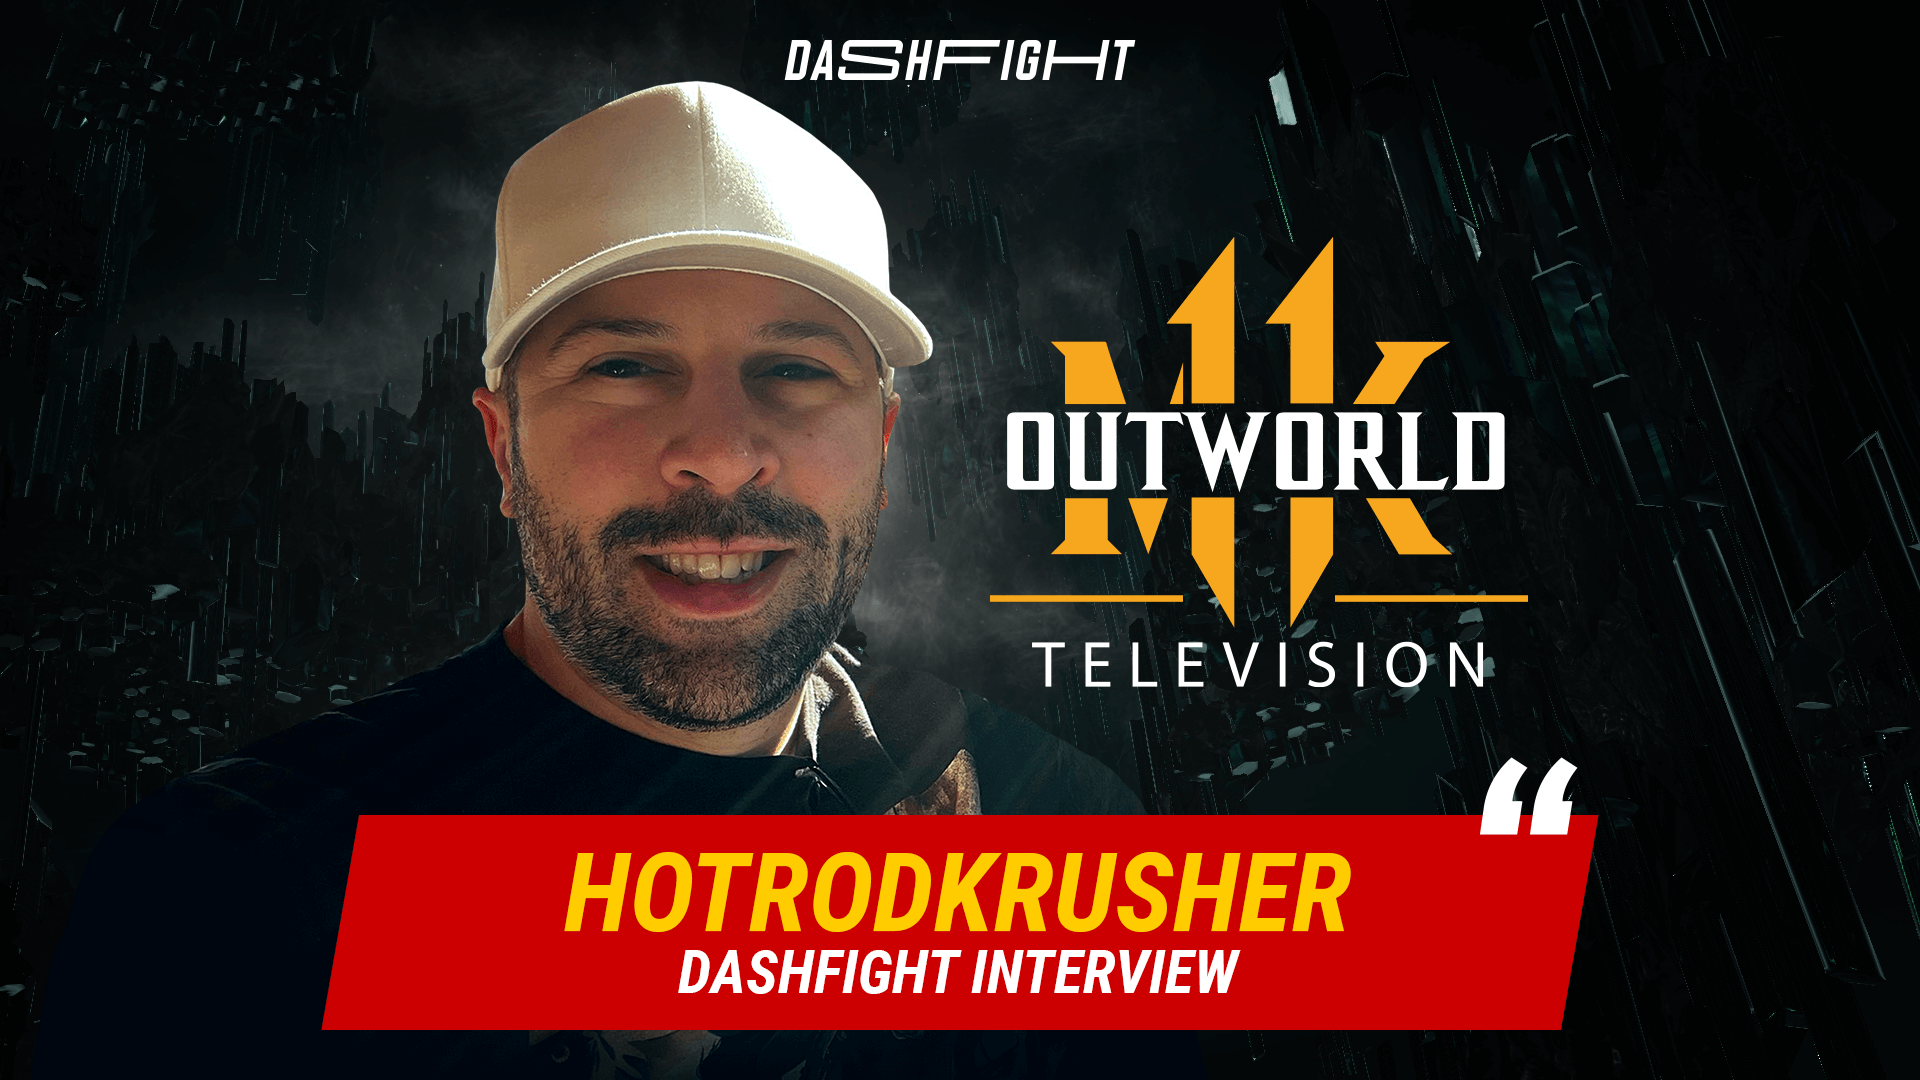 Interview with hotrodkrusher by DashFight